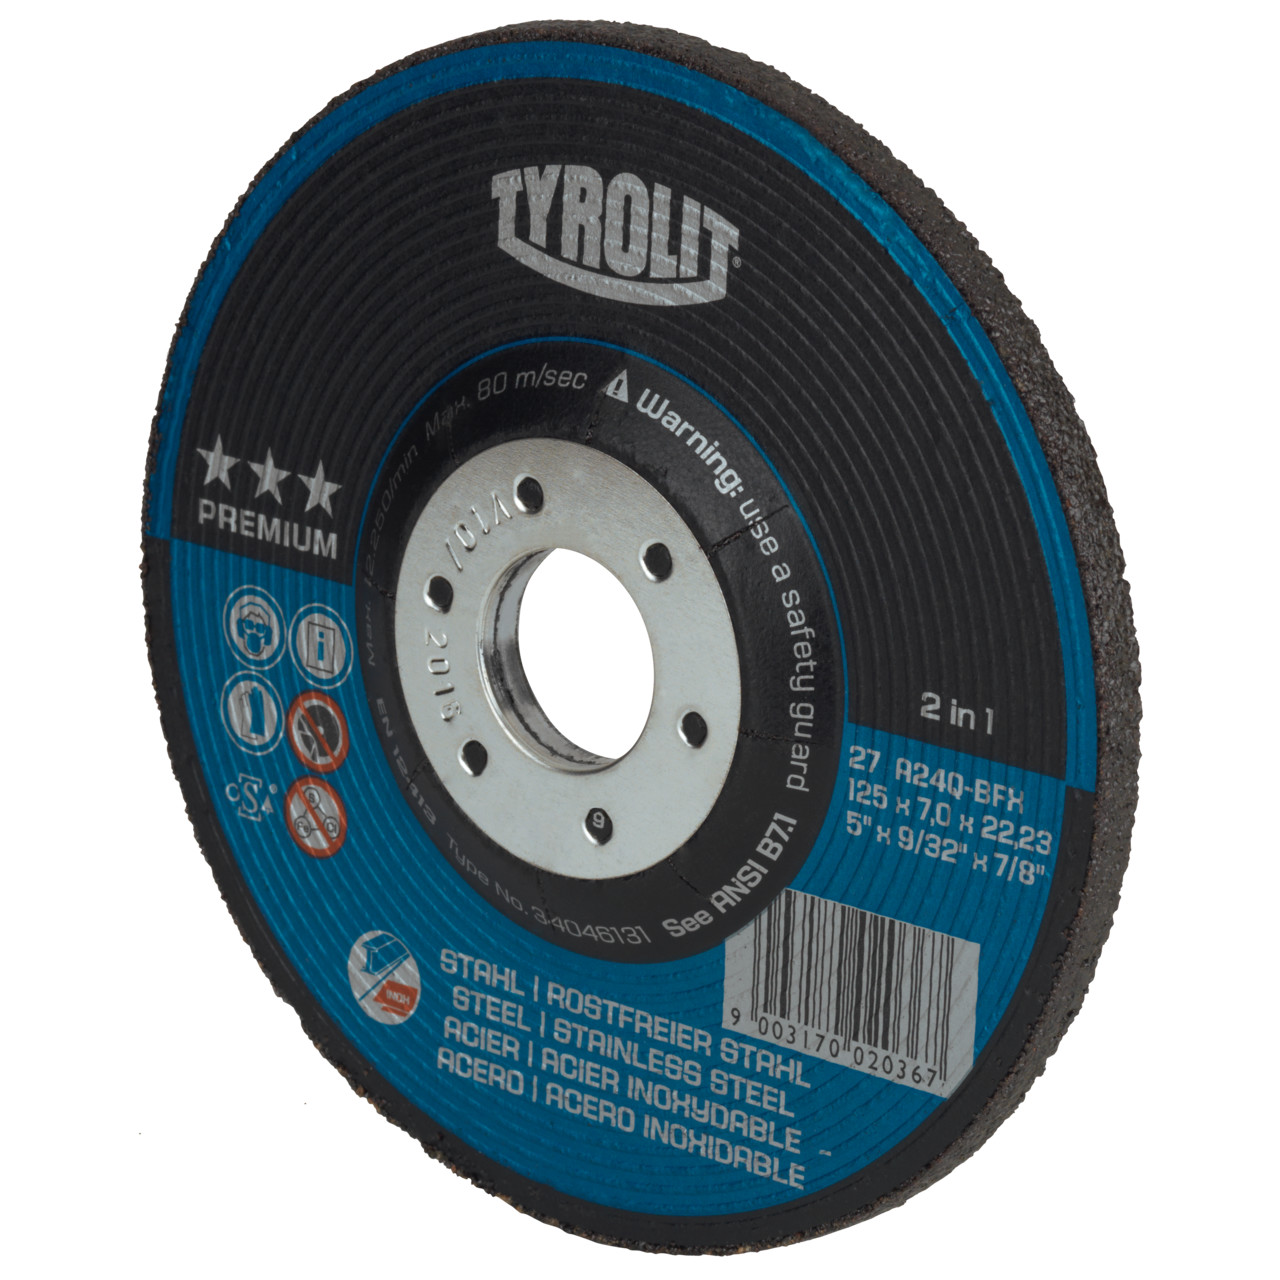 Tyrolit Rough grinding disc DxUxH 115x7x22.23 2in1 for steel and stainless steel, shape: 27 - offset version, Art. 34046120